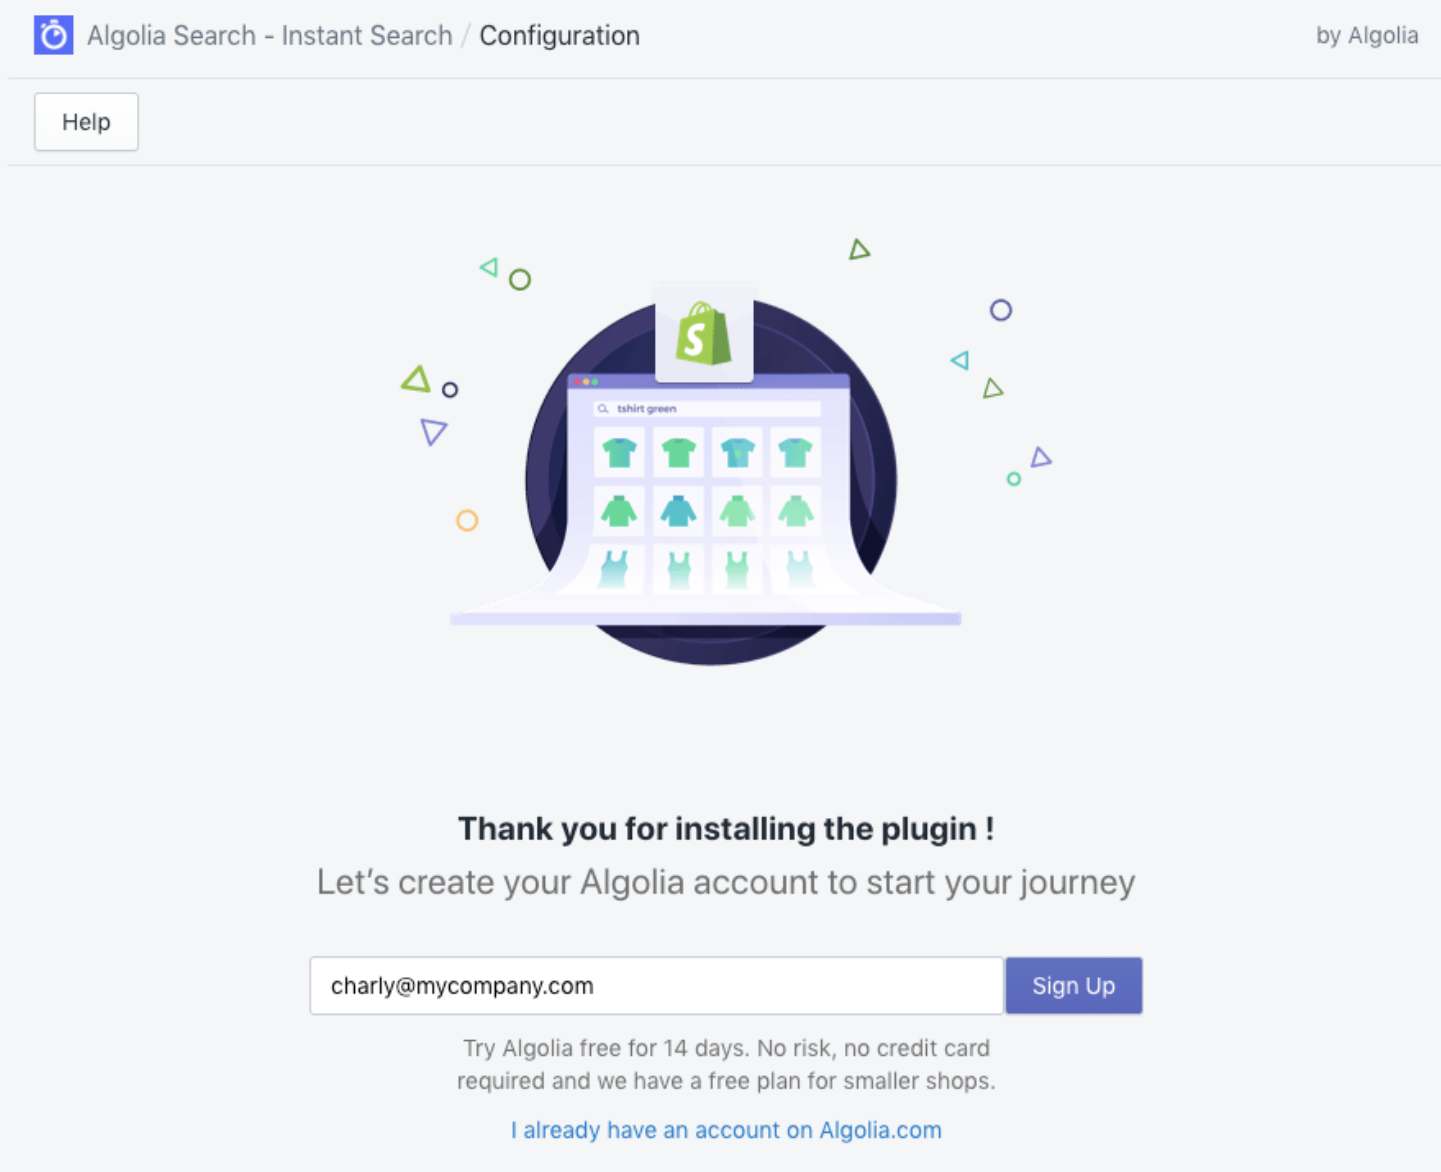 Sign up for an Algolia account